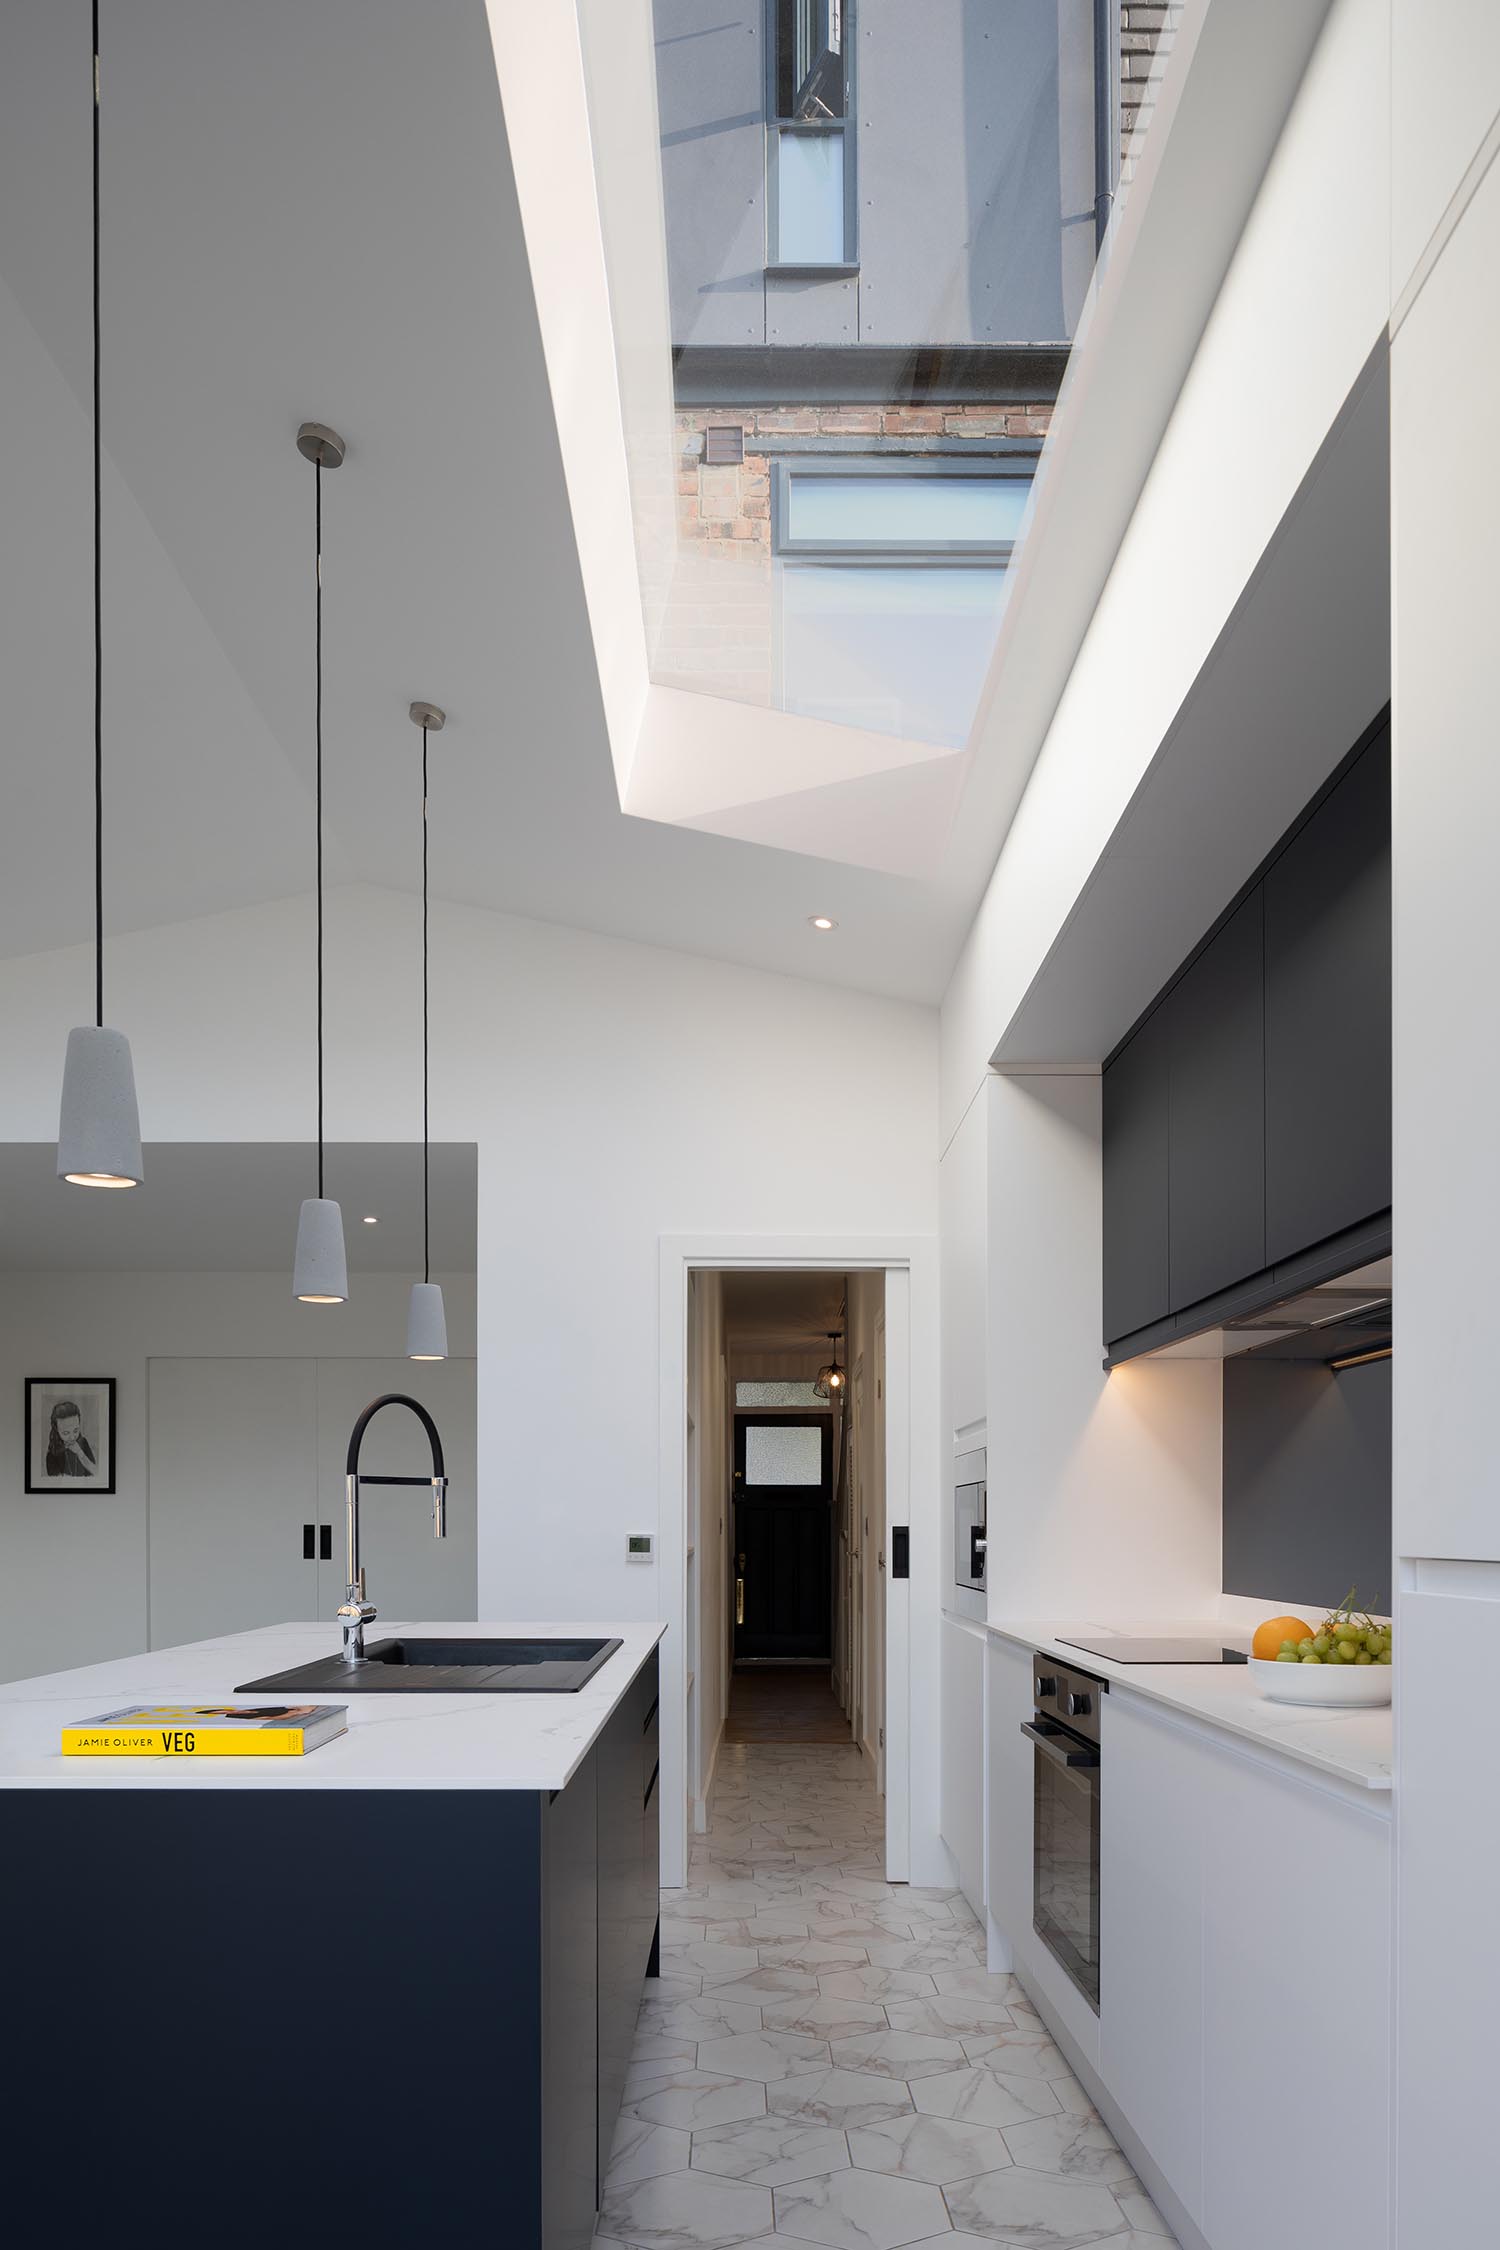 A modern kitchen with a skylight and pitched ceiling.